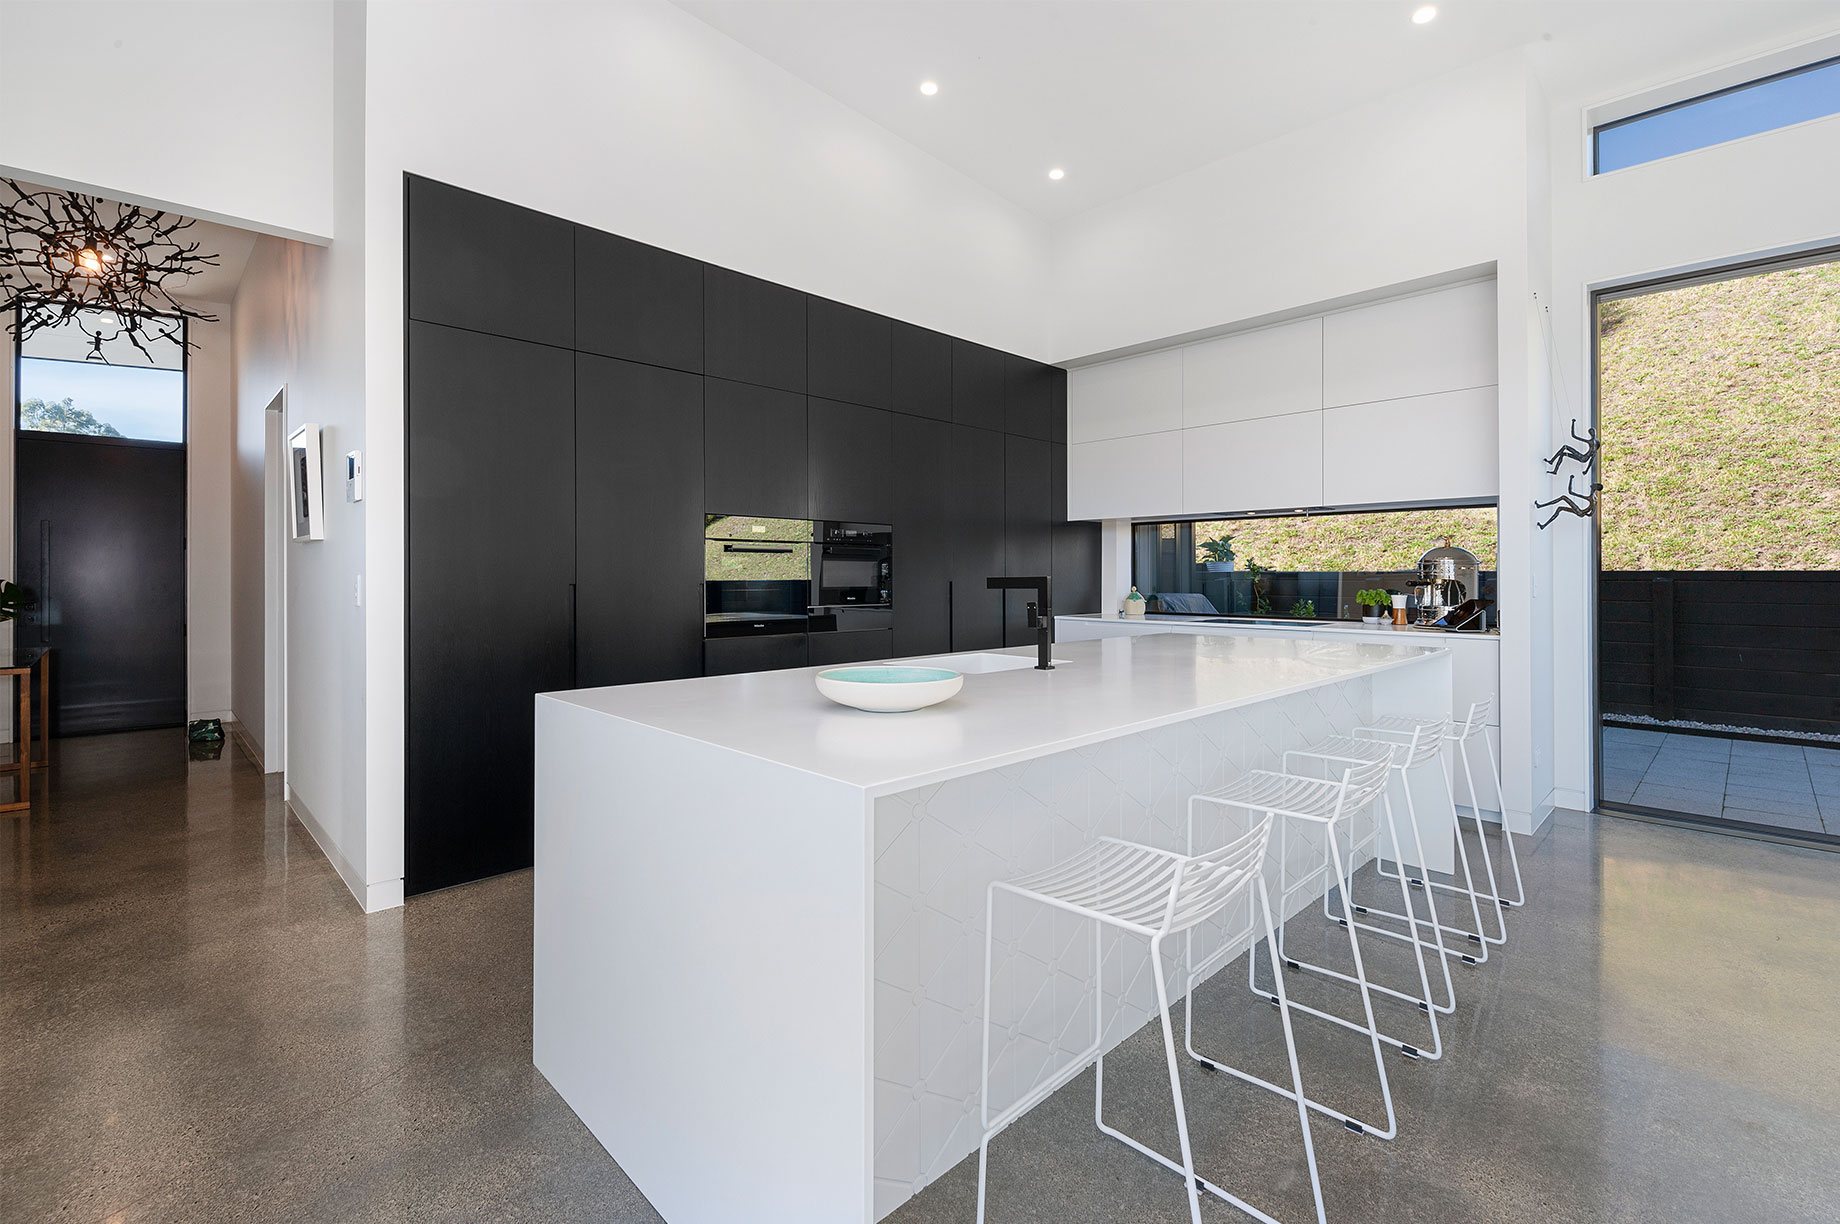 Black kitchen with white kitchen island and barstool chairs